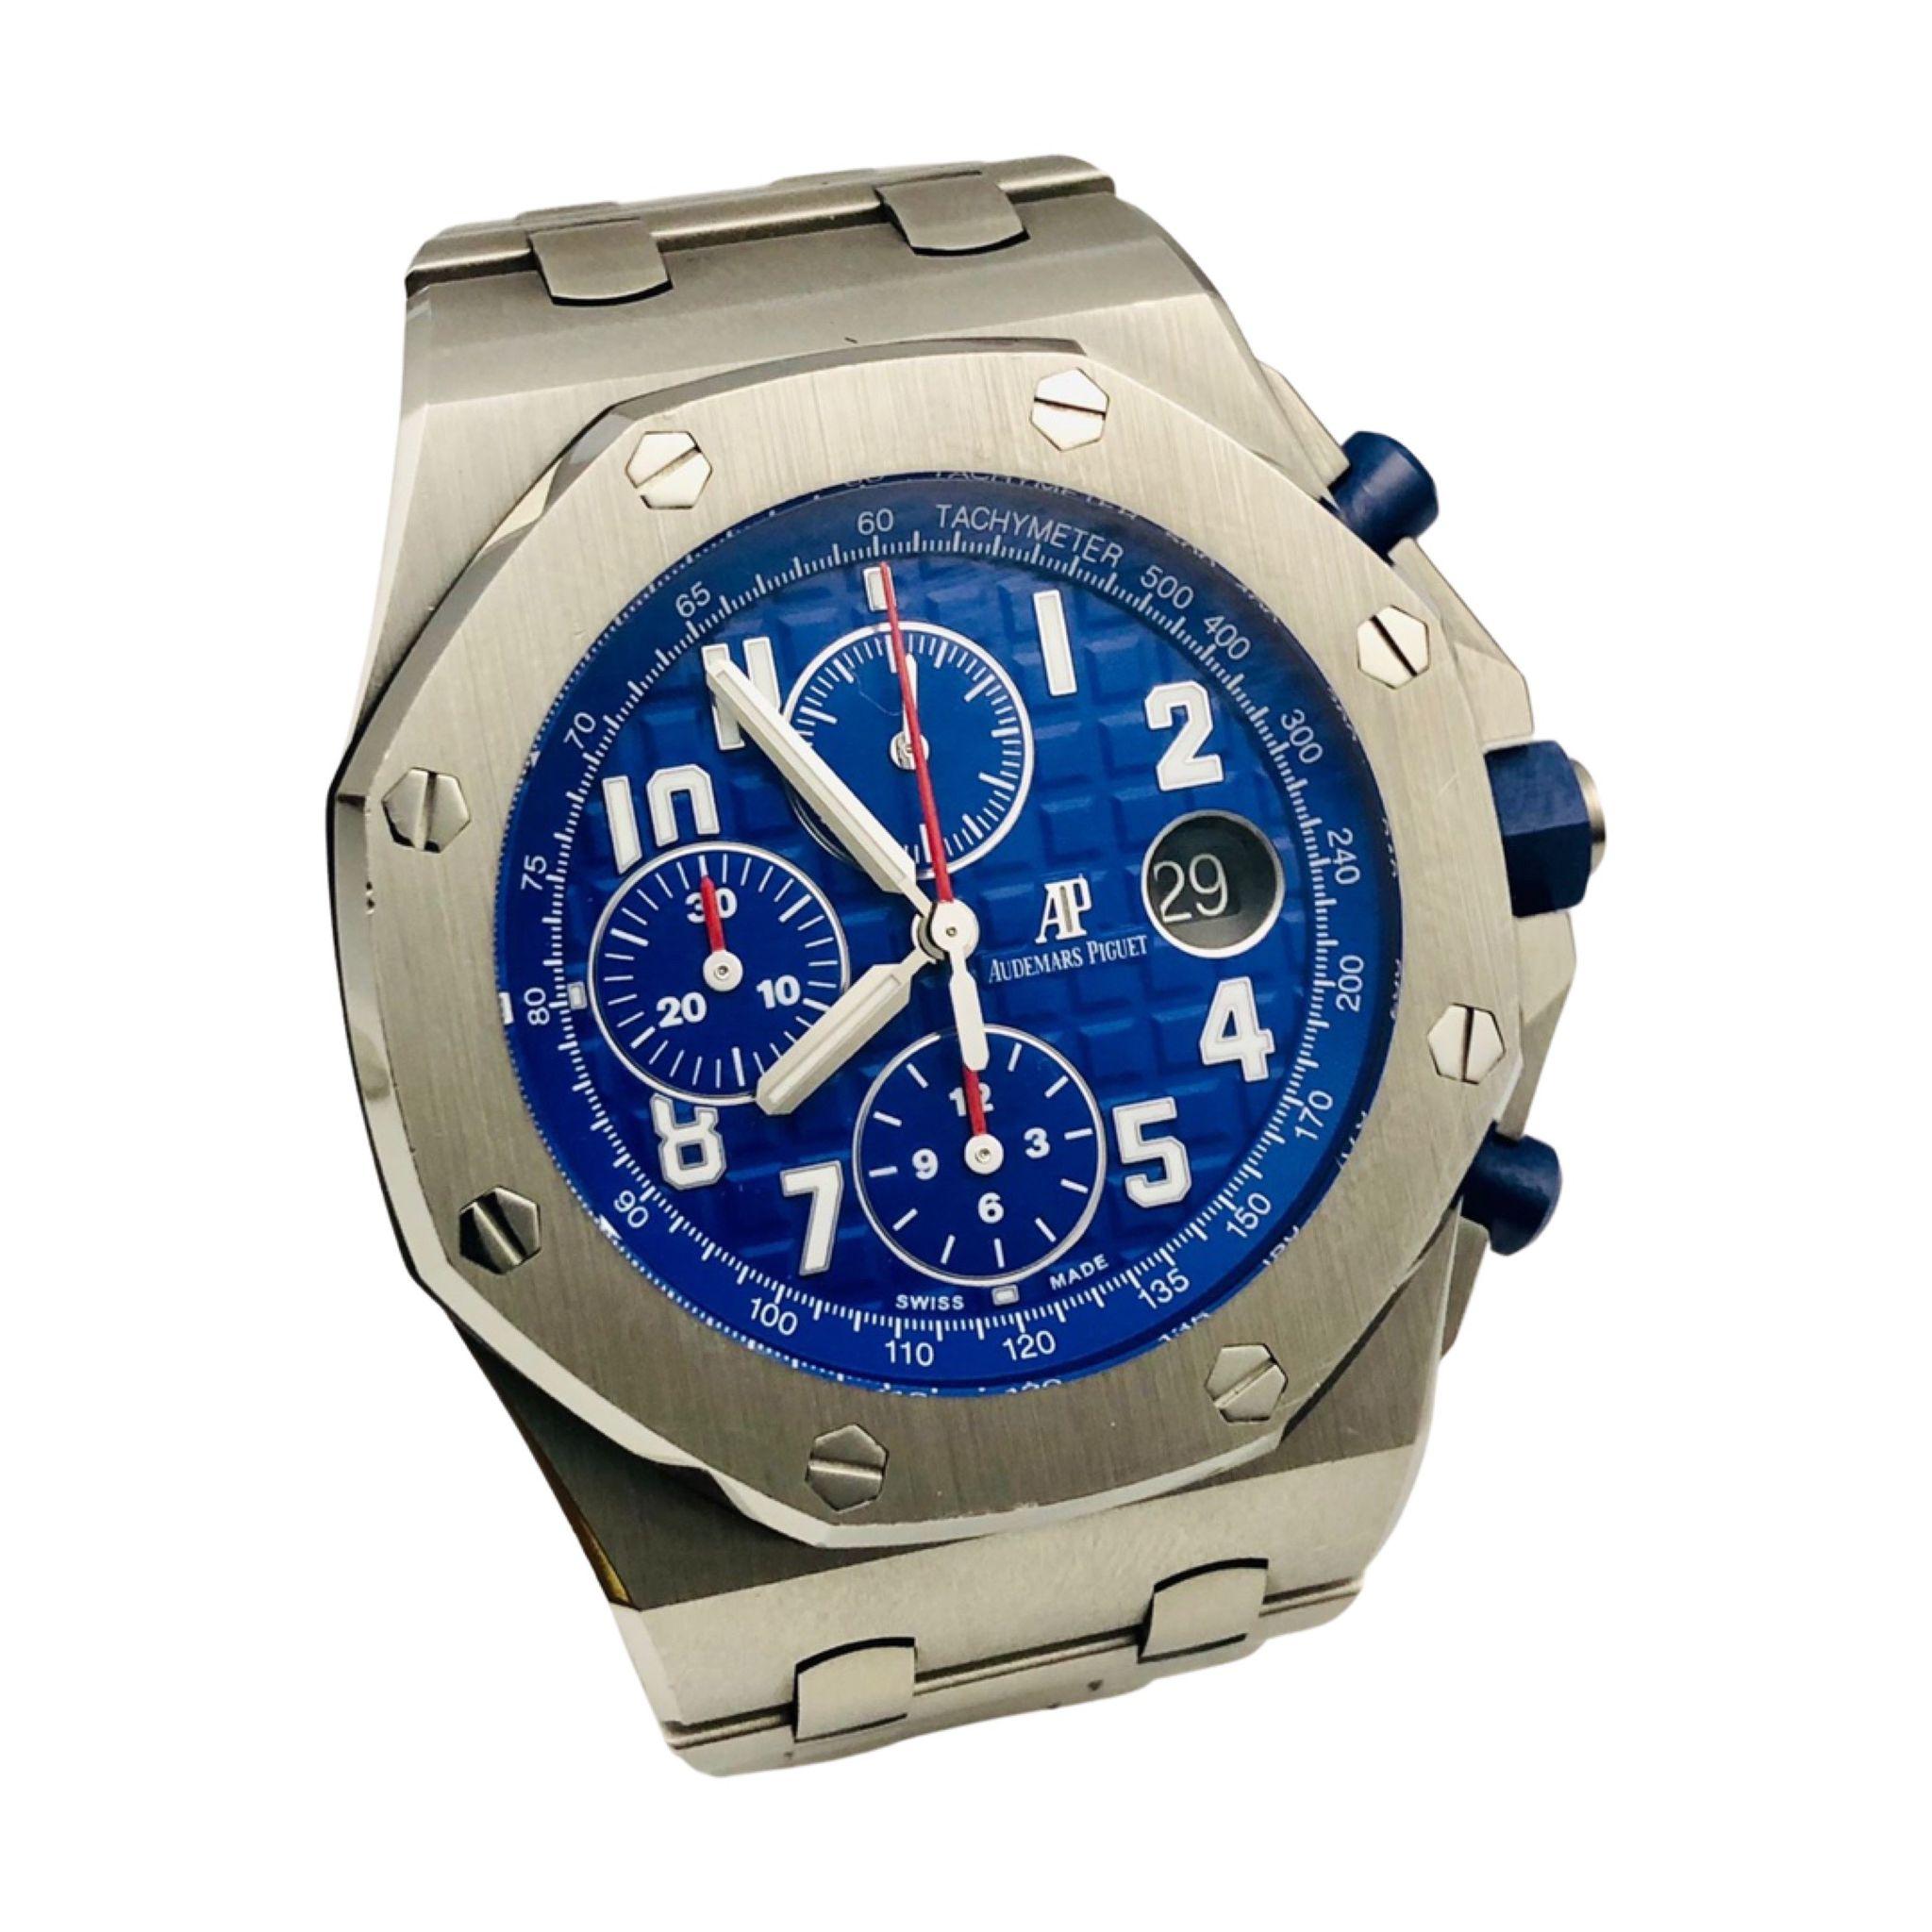 Brand: Audemars Piguet

Collection: Royal Oak Offshore

Reference No.: 26470ST.OO.A030CA.01

Movement:  Automatic Winding

Case Material: Stainless Steel

Case Size: 42 mm

Case Shape: Octagonal

Dial: Indigo Blue

Bezel: Stainless Steel

Bracelet: